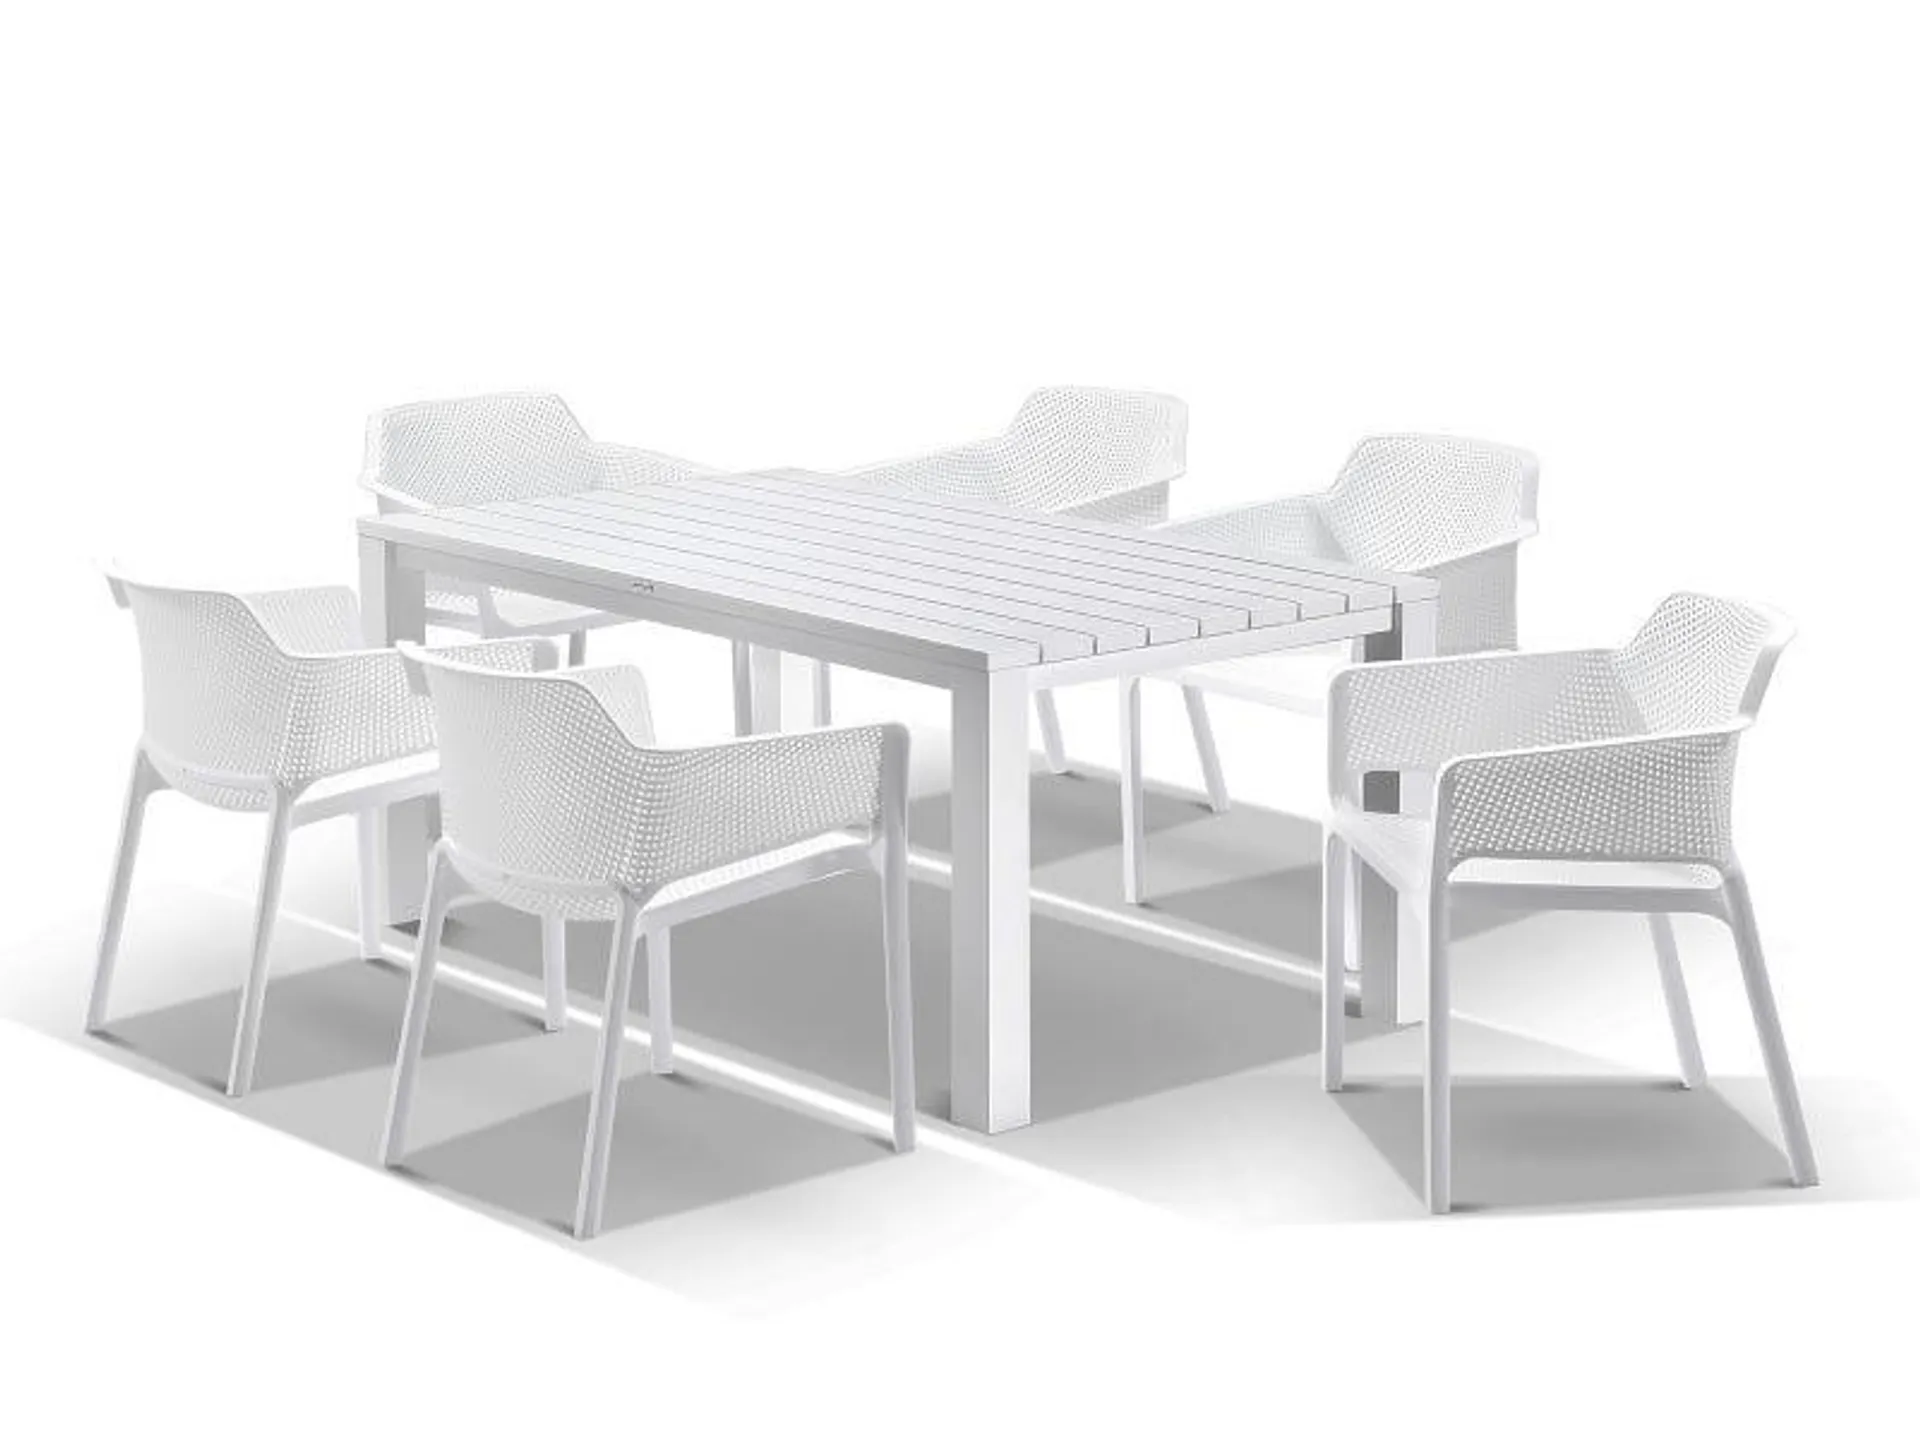 Adele Table with Bailey Chairs 7pc Outdoor Dining Setting